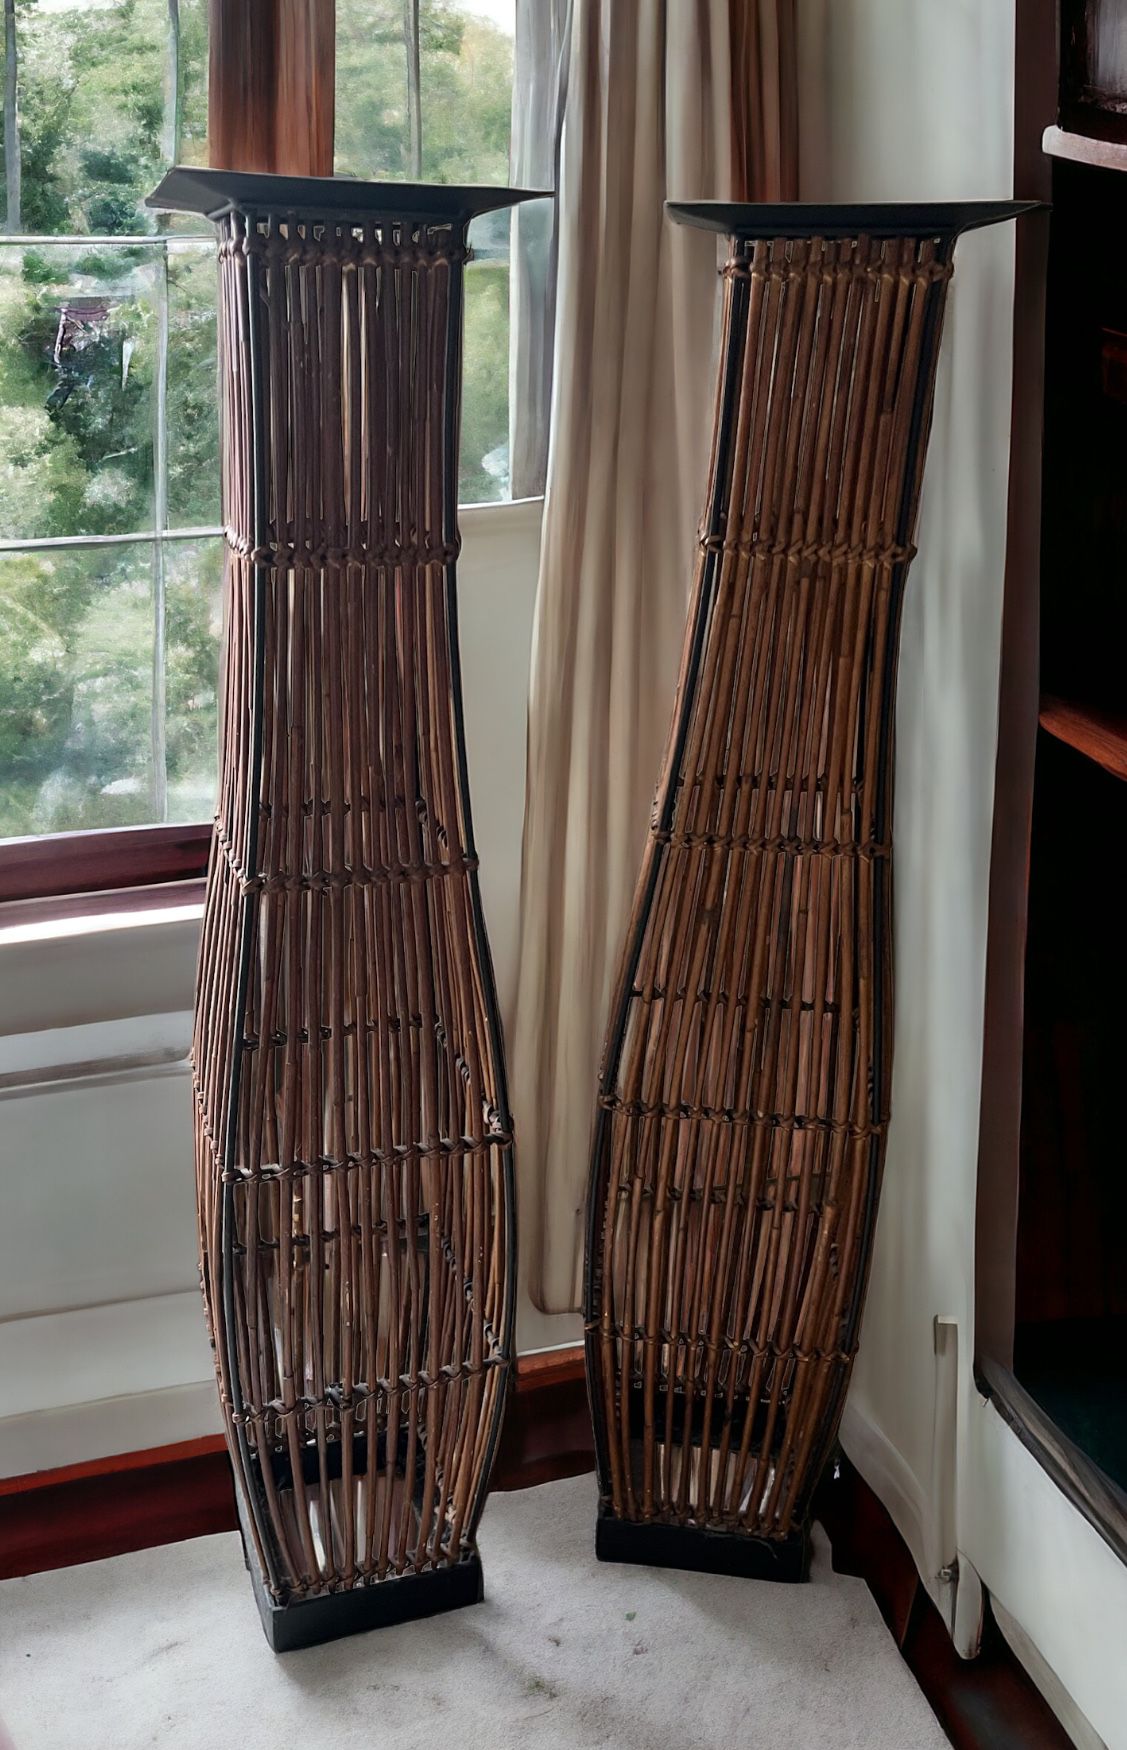 Two Wicker Plant/Candle Holders 30” X 6”